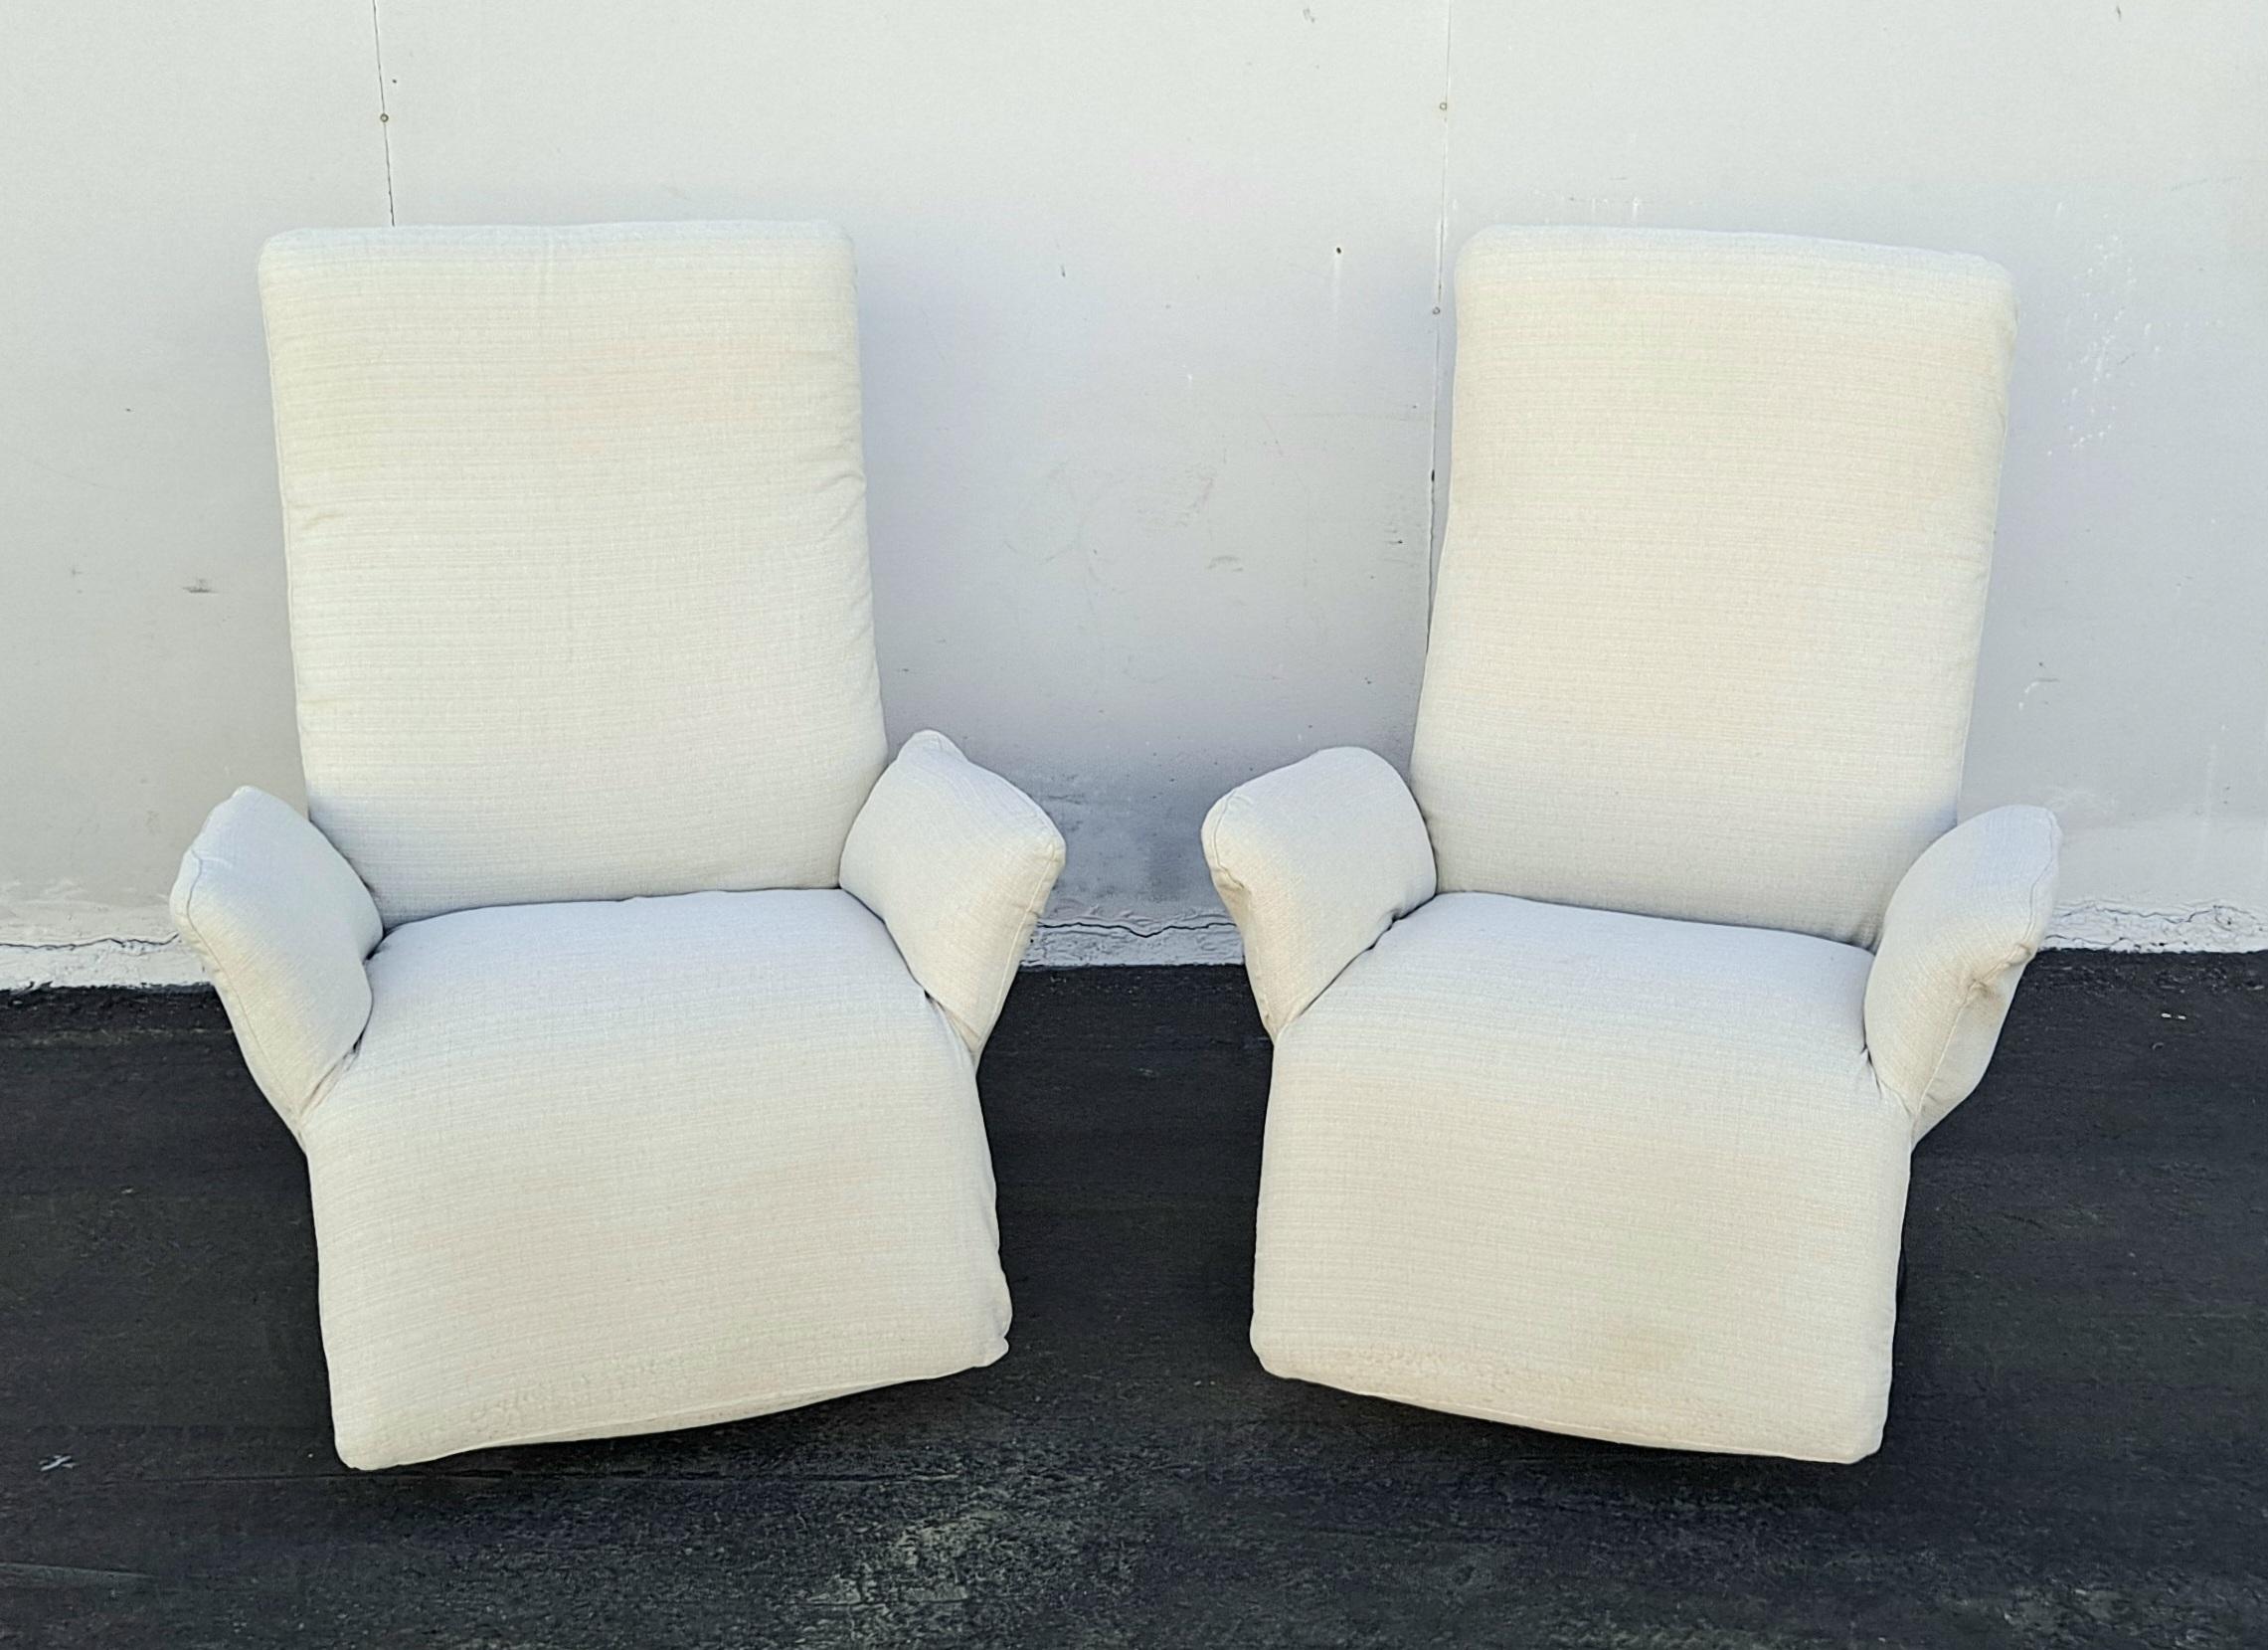 Italian 1970s vintage lounge chair in original white fabric from the 1970s the chair reclines when the reclining button turns left. When the lounge chair recline fully extended is 50 inches long. The lounge chair swivels, fabric upholstery was just